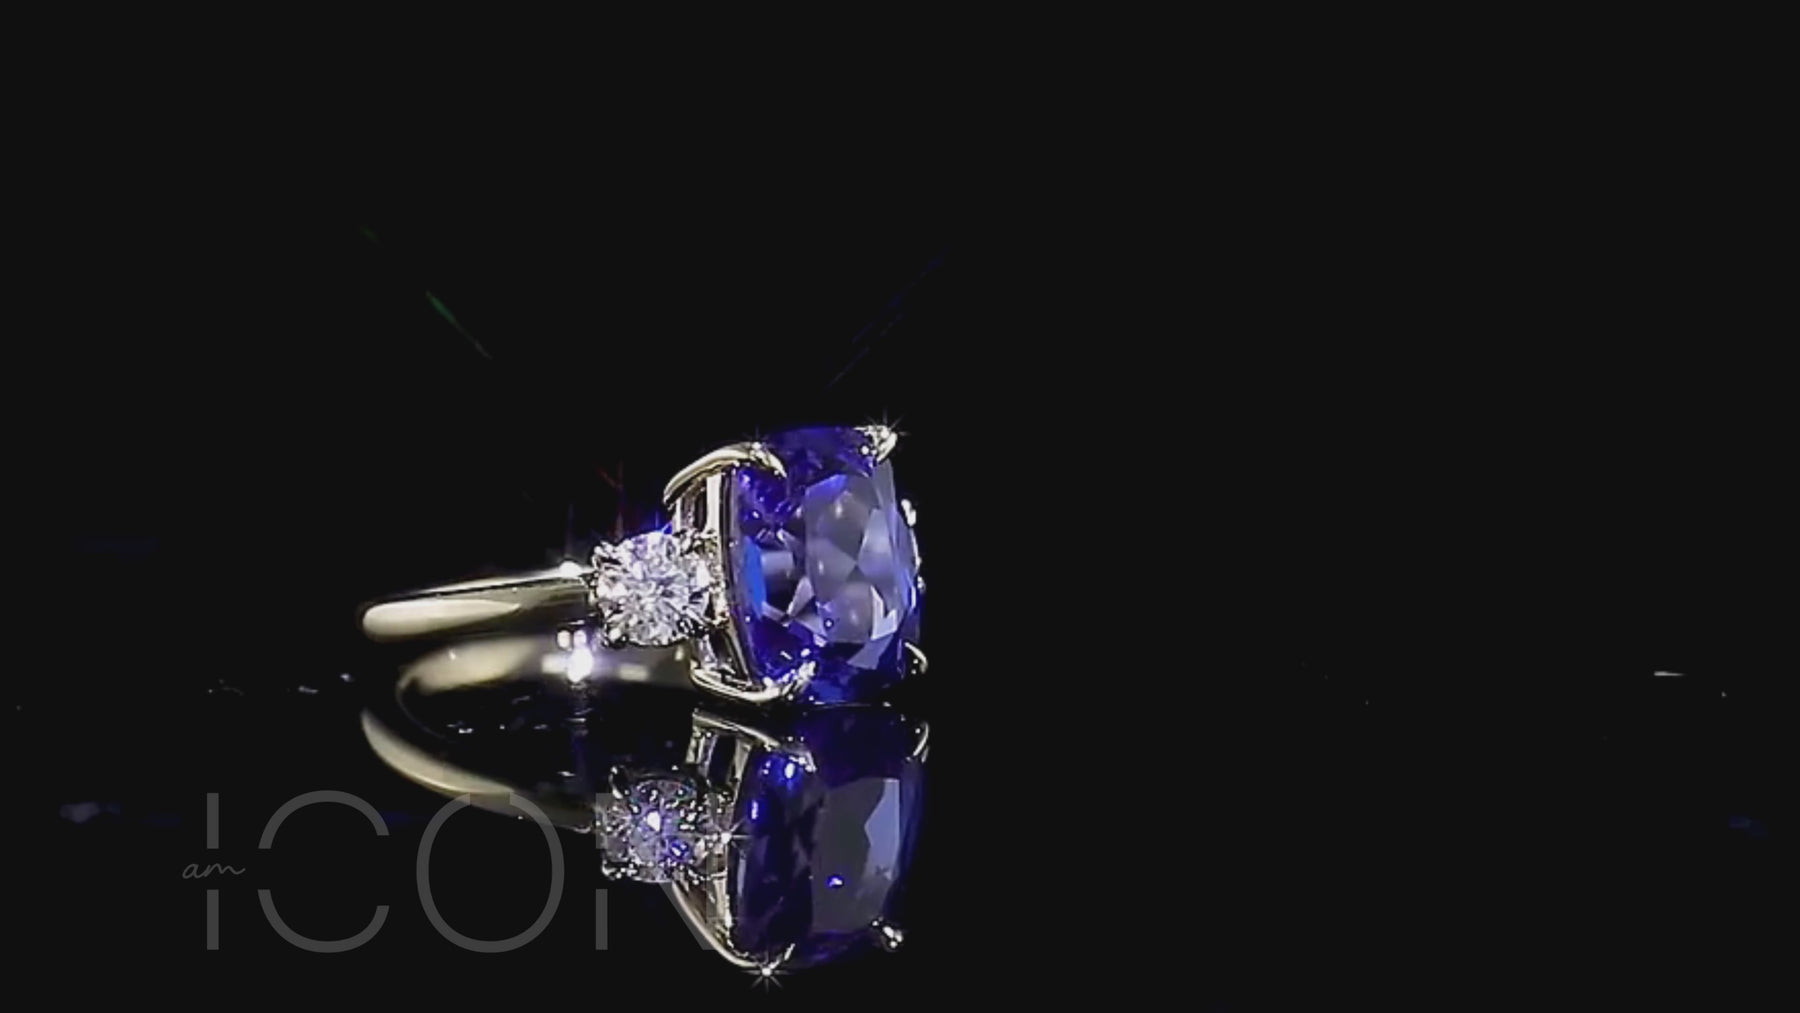 Chanel Set Cushion Cut Faceted Blue/purple Tanzanite in An 18k Gold Tension Setting  Ring